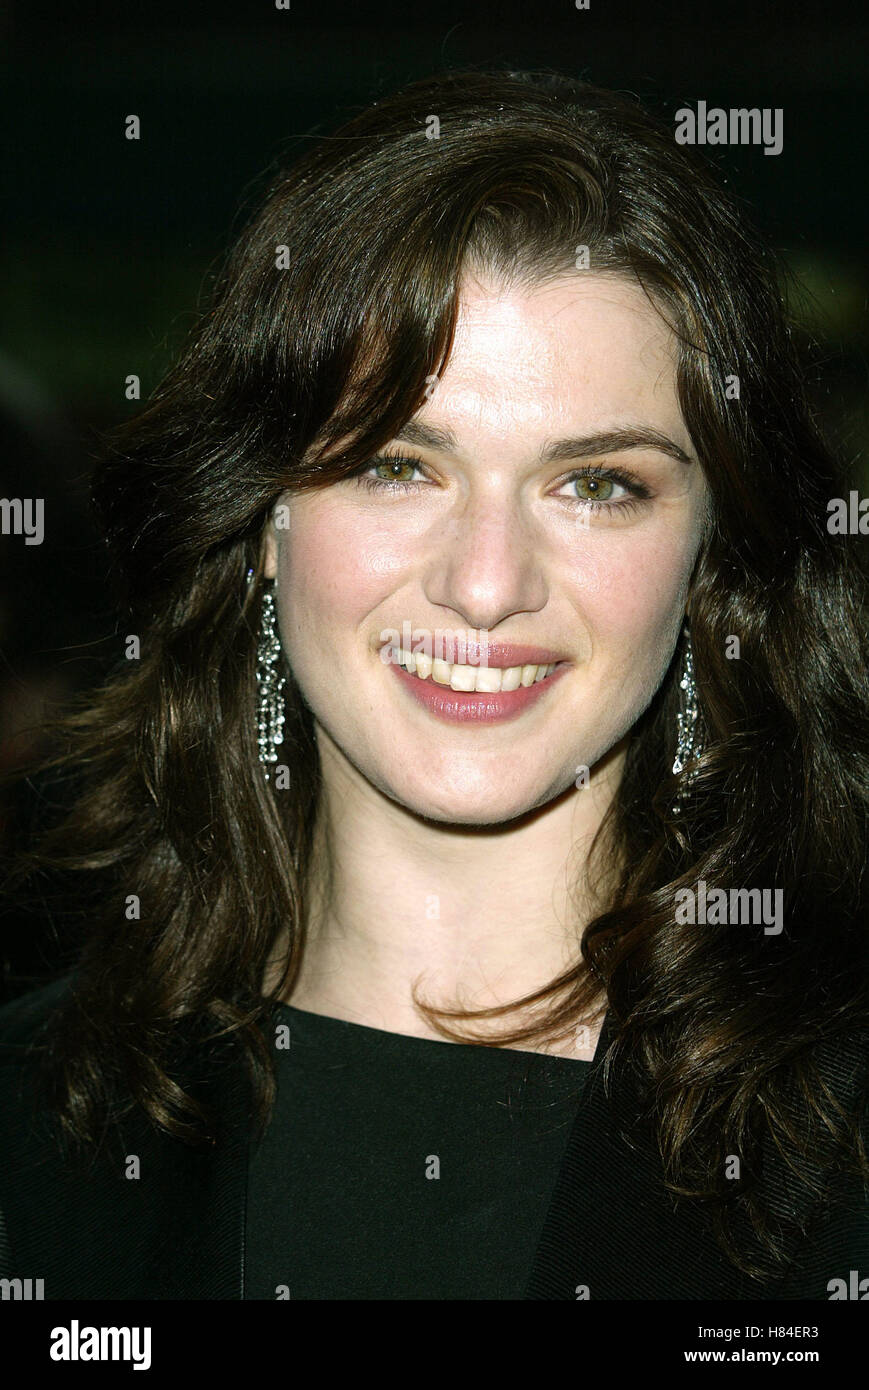 RACHEL WEISZ 1 GIANT LEAP FILM PREMIERE EGYPTIAN THEATRE HOLLYWOOD LOS ANGELES USA 06 May 2002 Stock Photo